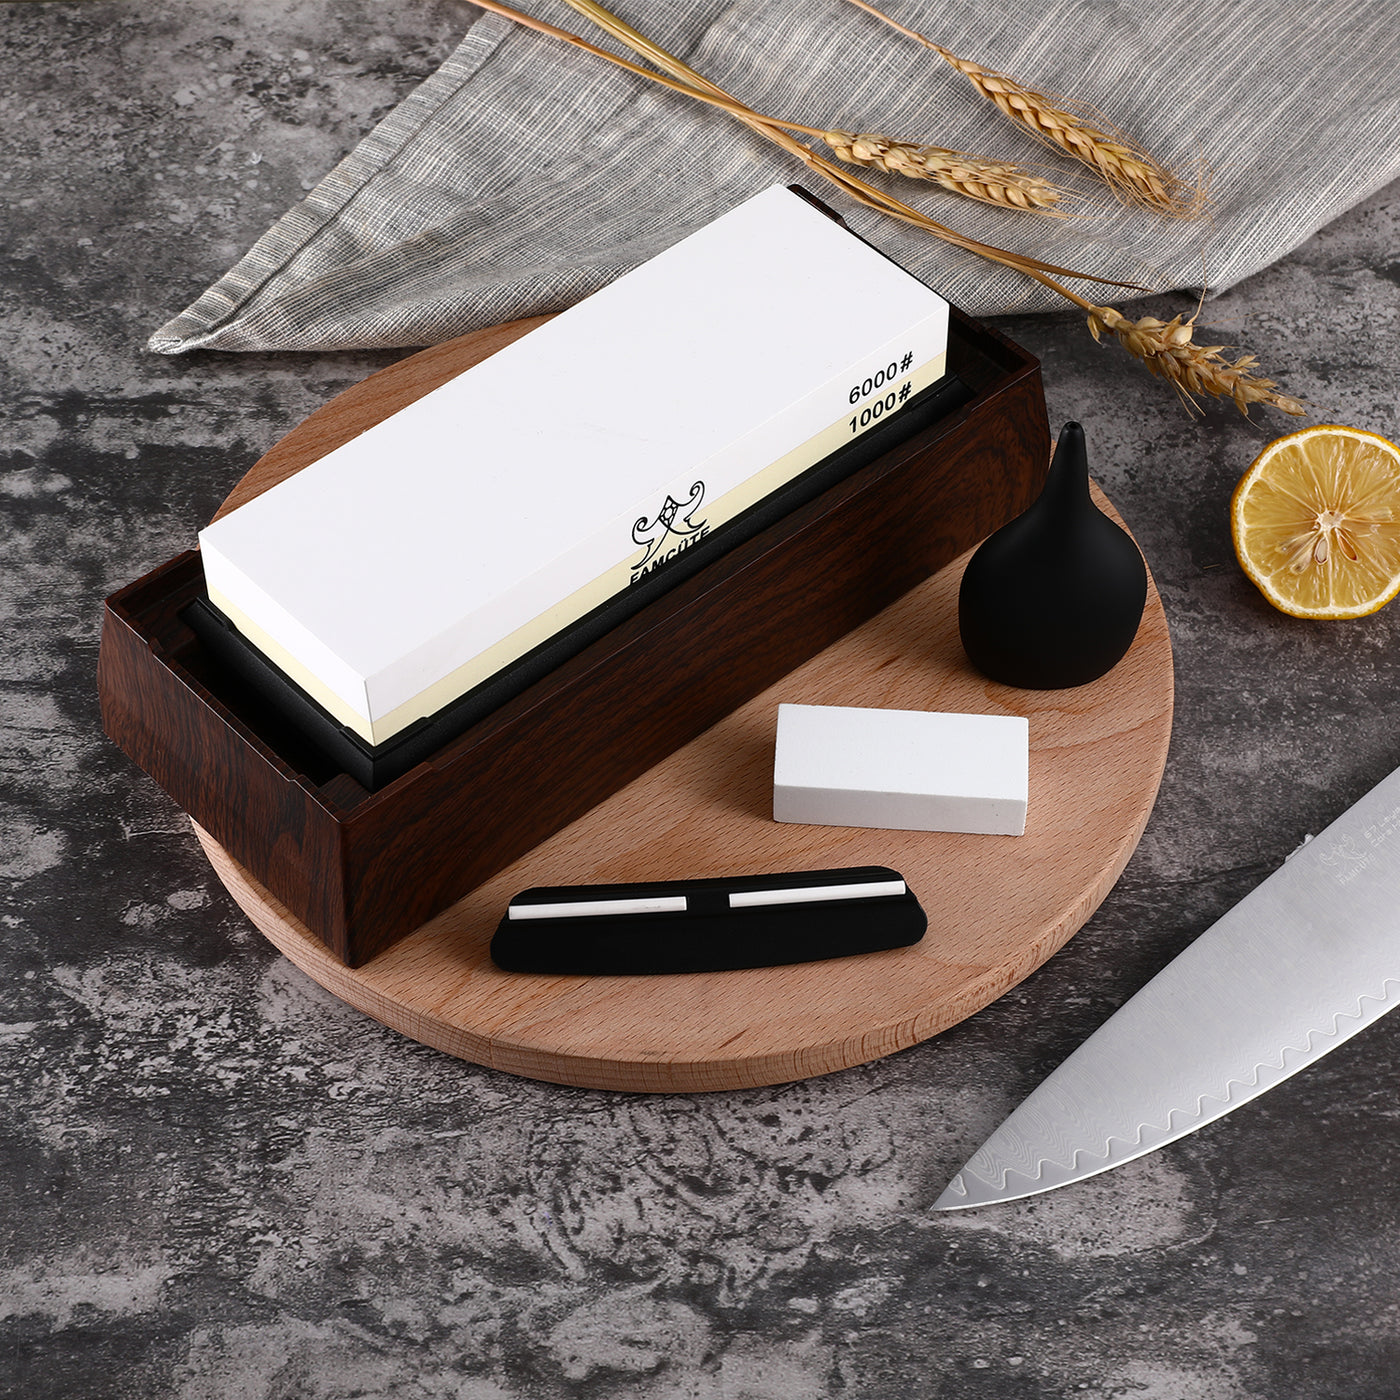 FAMCÜTE Japanese Chef Knife Set, 3 Layer 9CR18MOV Clad Steel w/Octagon Handle and Block Wooden Holder for 4Piece Kitchen Knife Set (8” Gyuto Knife